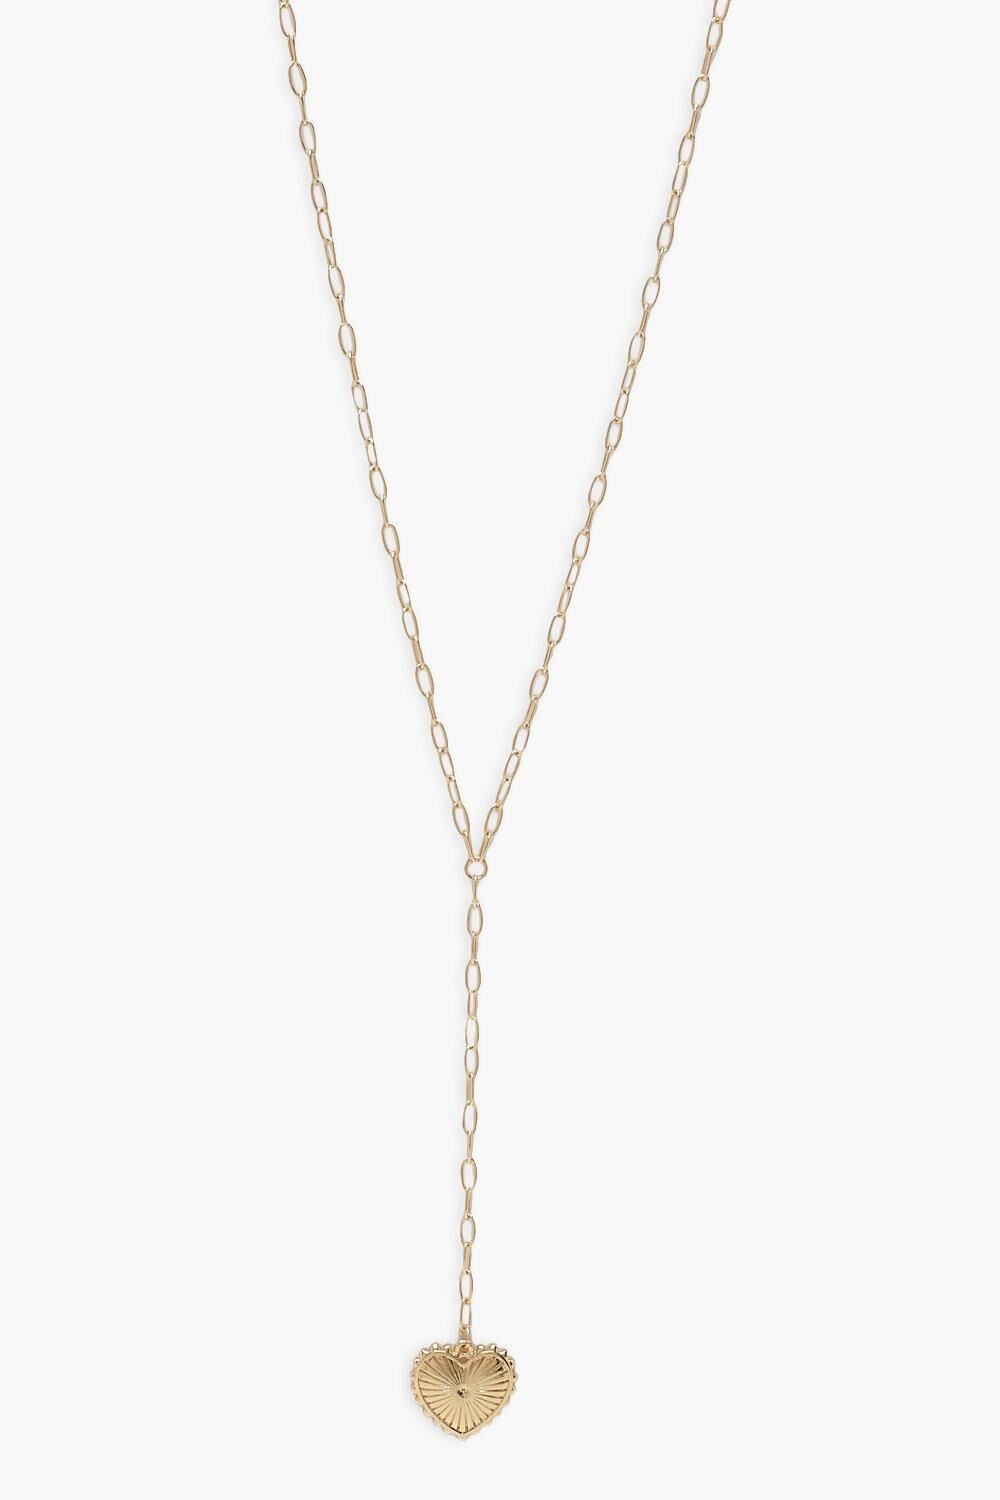 Boohoo Plunge Heart Necklace- Gold  - Size: ONE SIZE